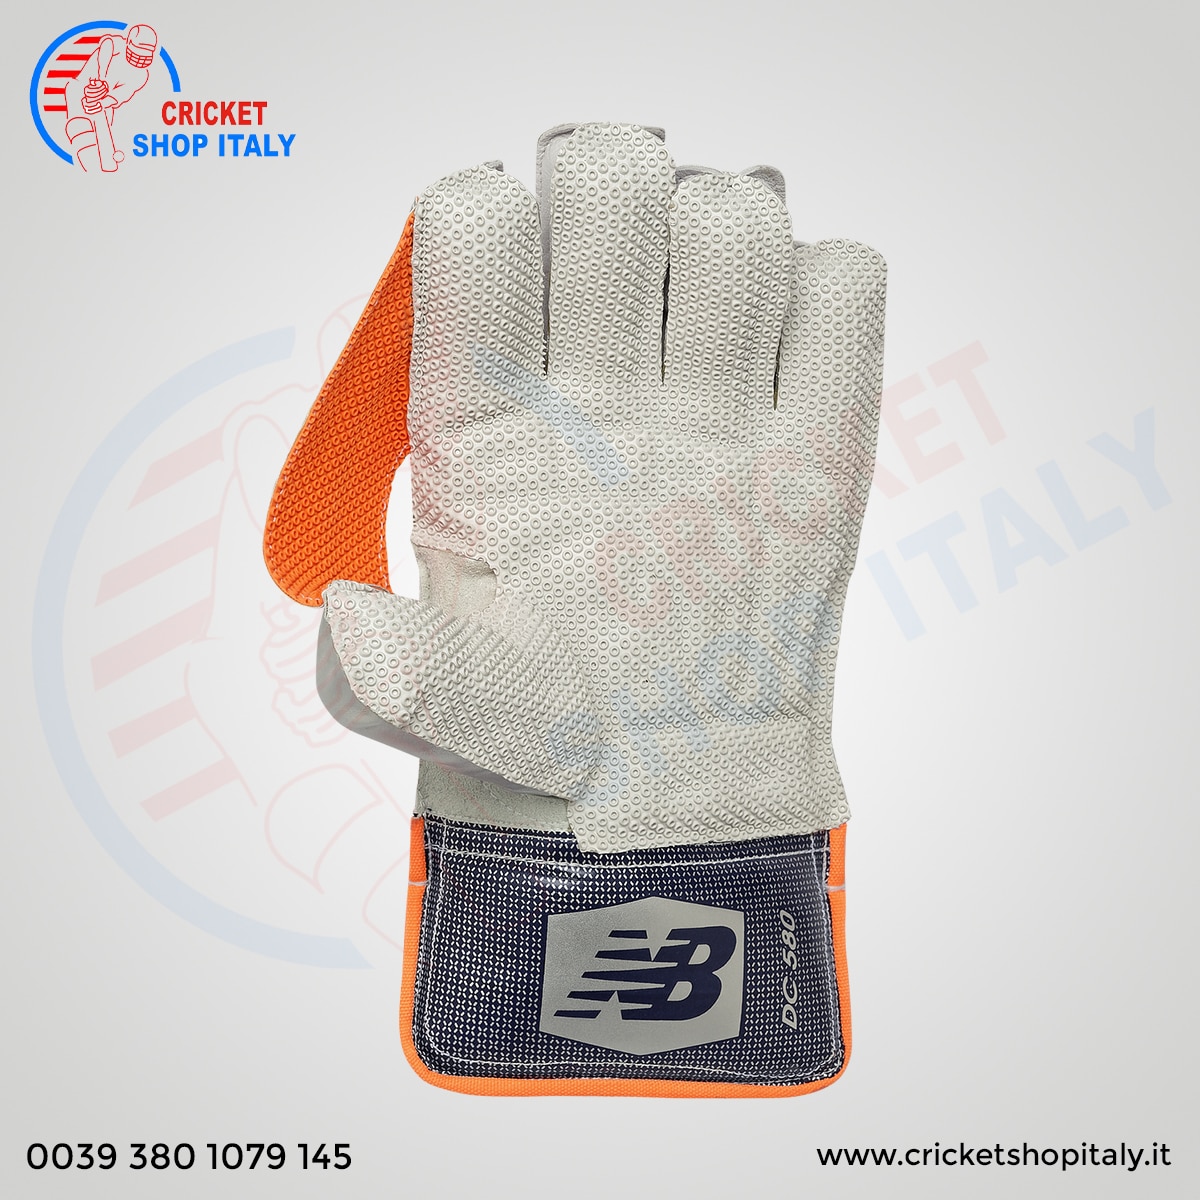 2022 New Balance DC 580 Wicket Keeping Gloves